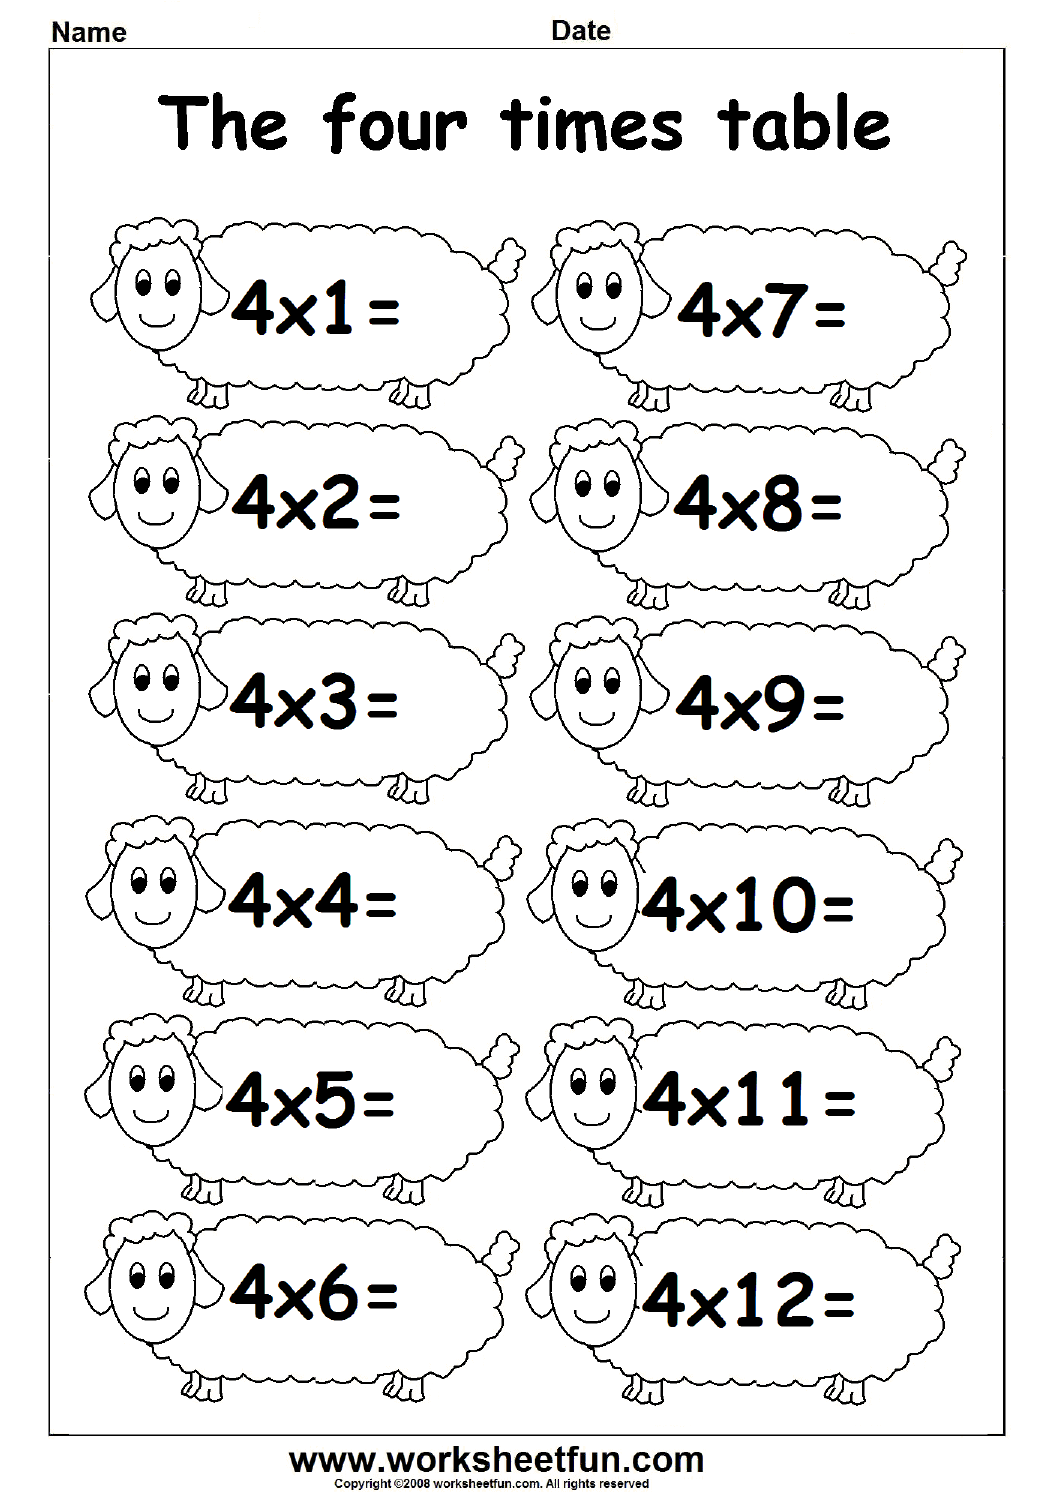 multiplication-times-tables-worksheets-2-3-4-times-tables-three-worksheets-free